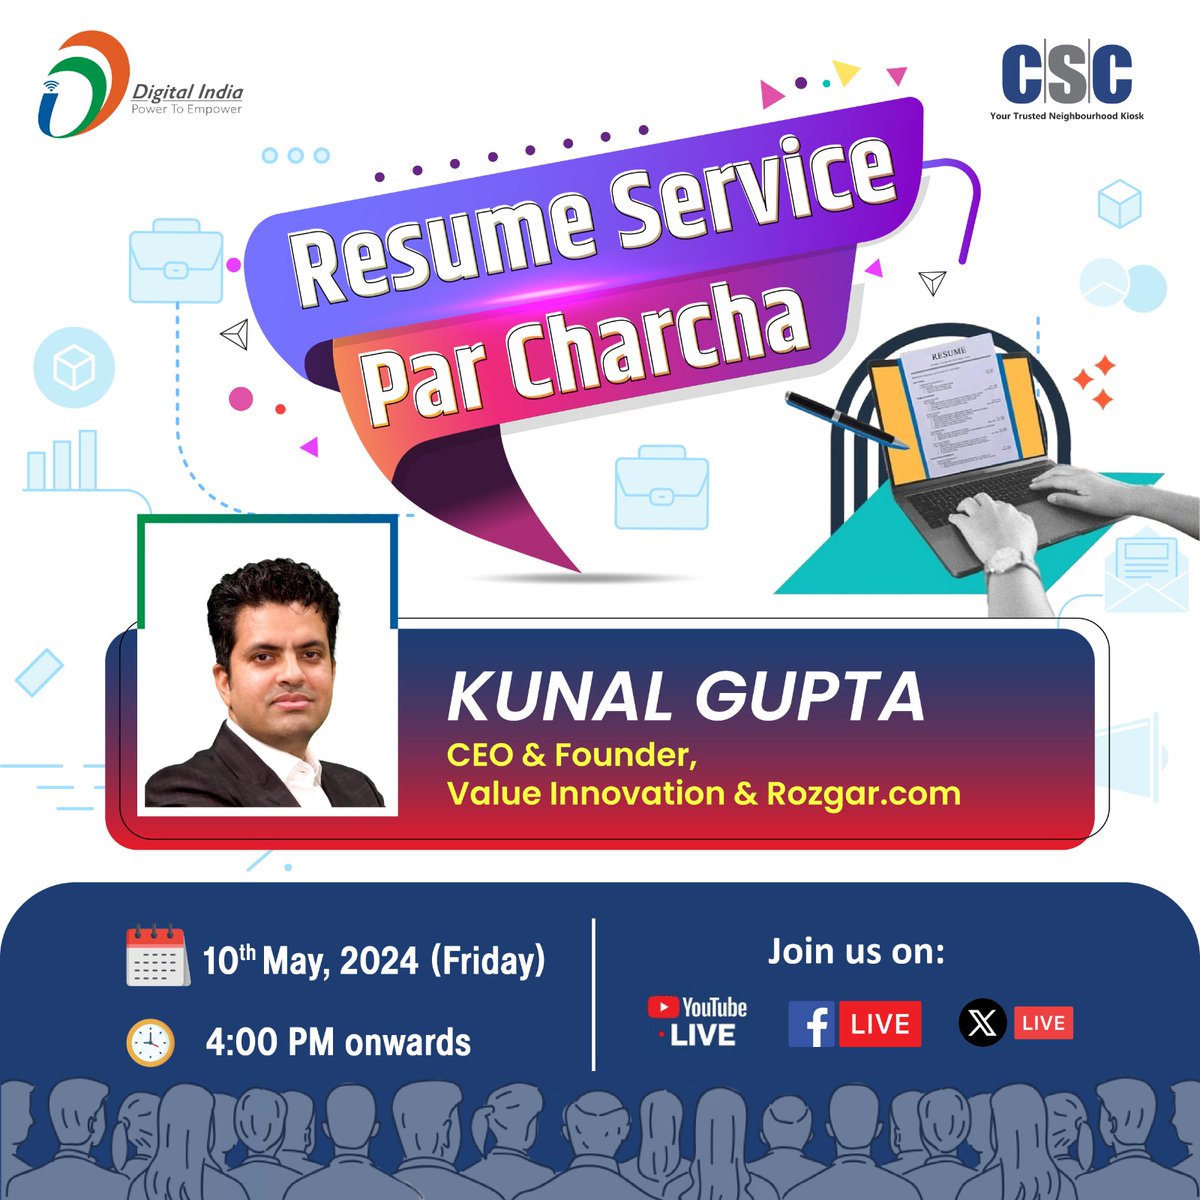 Resume Service Par Charcha... In this discussion, Kunal Gupta, CEO & Founder, Value Innovation & Rozgar.com will be joining us LIVE on CSC X Page, on 10th May, 2024 (Friday) from 4 PM onwards. #DigitalIndia #Resume #CSCParCharcha #ResumeParCharcha @naveensharmacsc